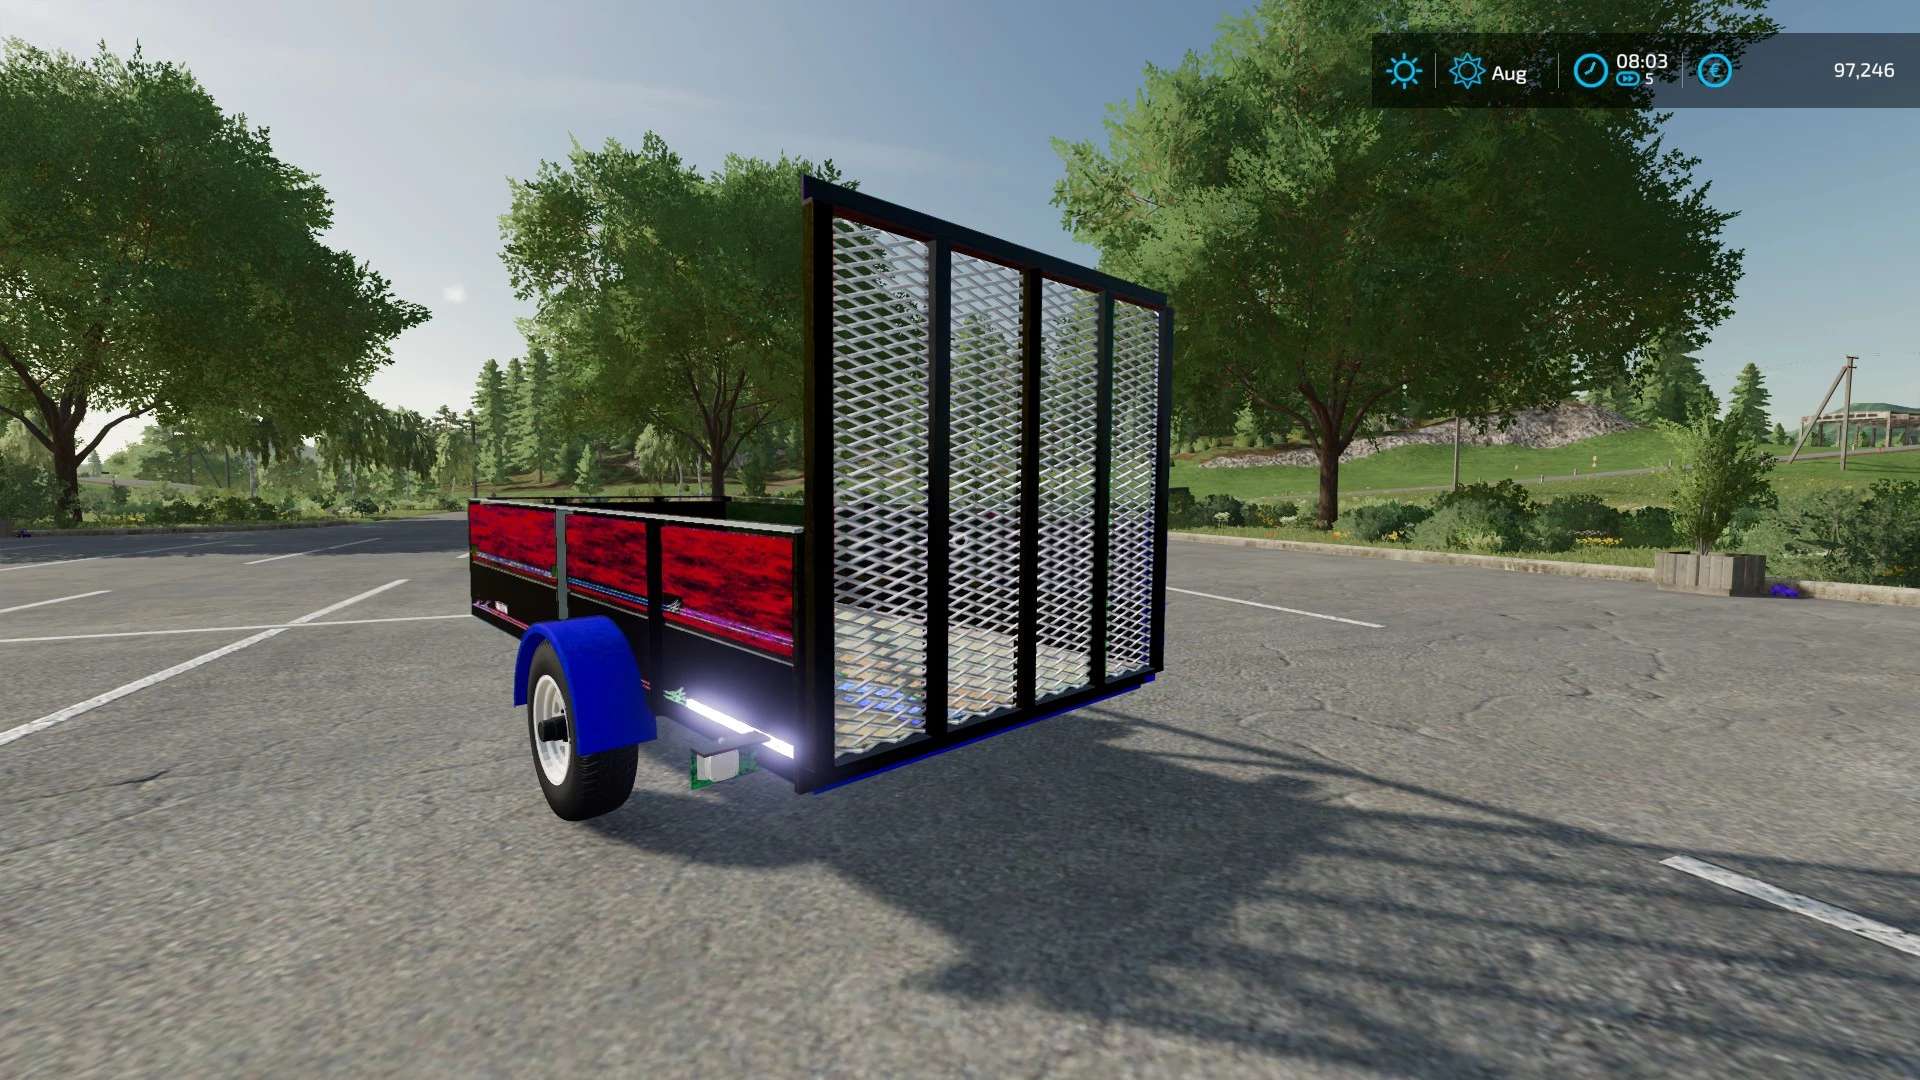 Fs22 1999 Neal Manufacturing Utility Trailer Converted V10 Fs 22 Trailers Mod Download 6734